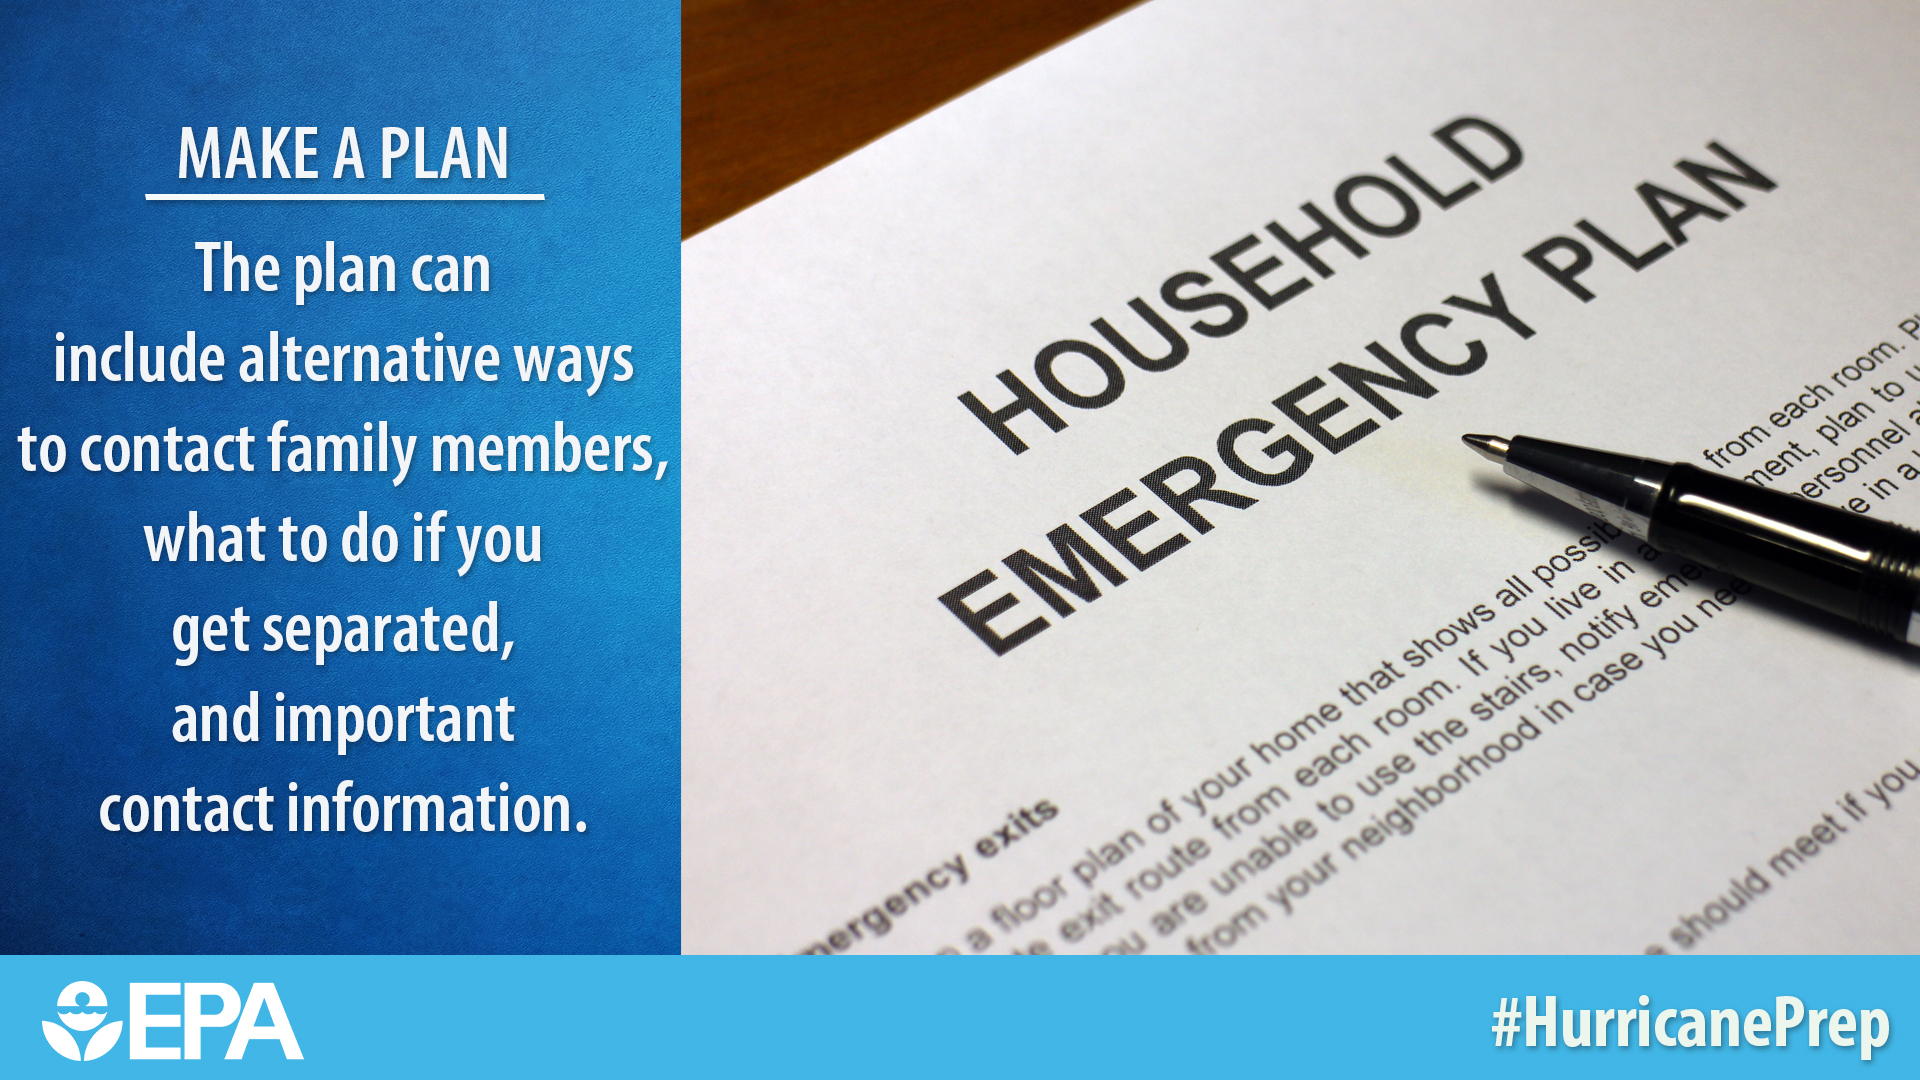 Make a Plan. The plan can include alternative ways to contact family members, what to do if you get separated, and important contact information.